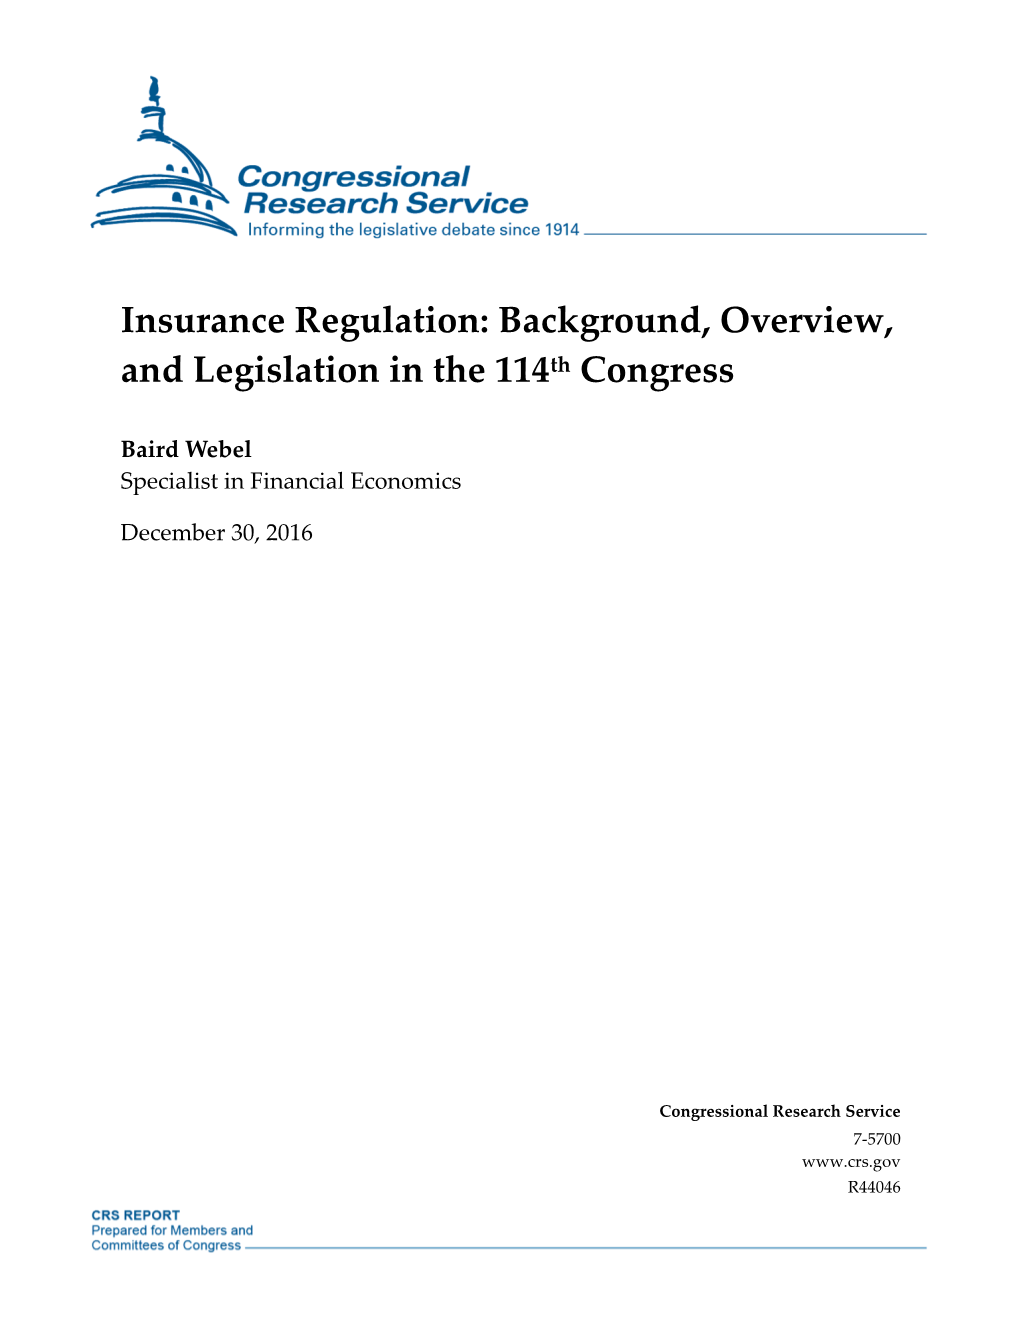 Insurance Regulation: Background, Overview, and Legislation in the 114Th Congress